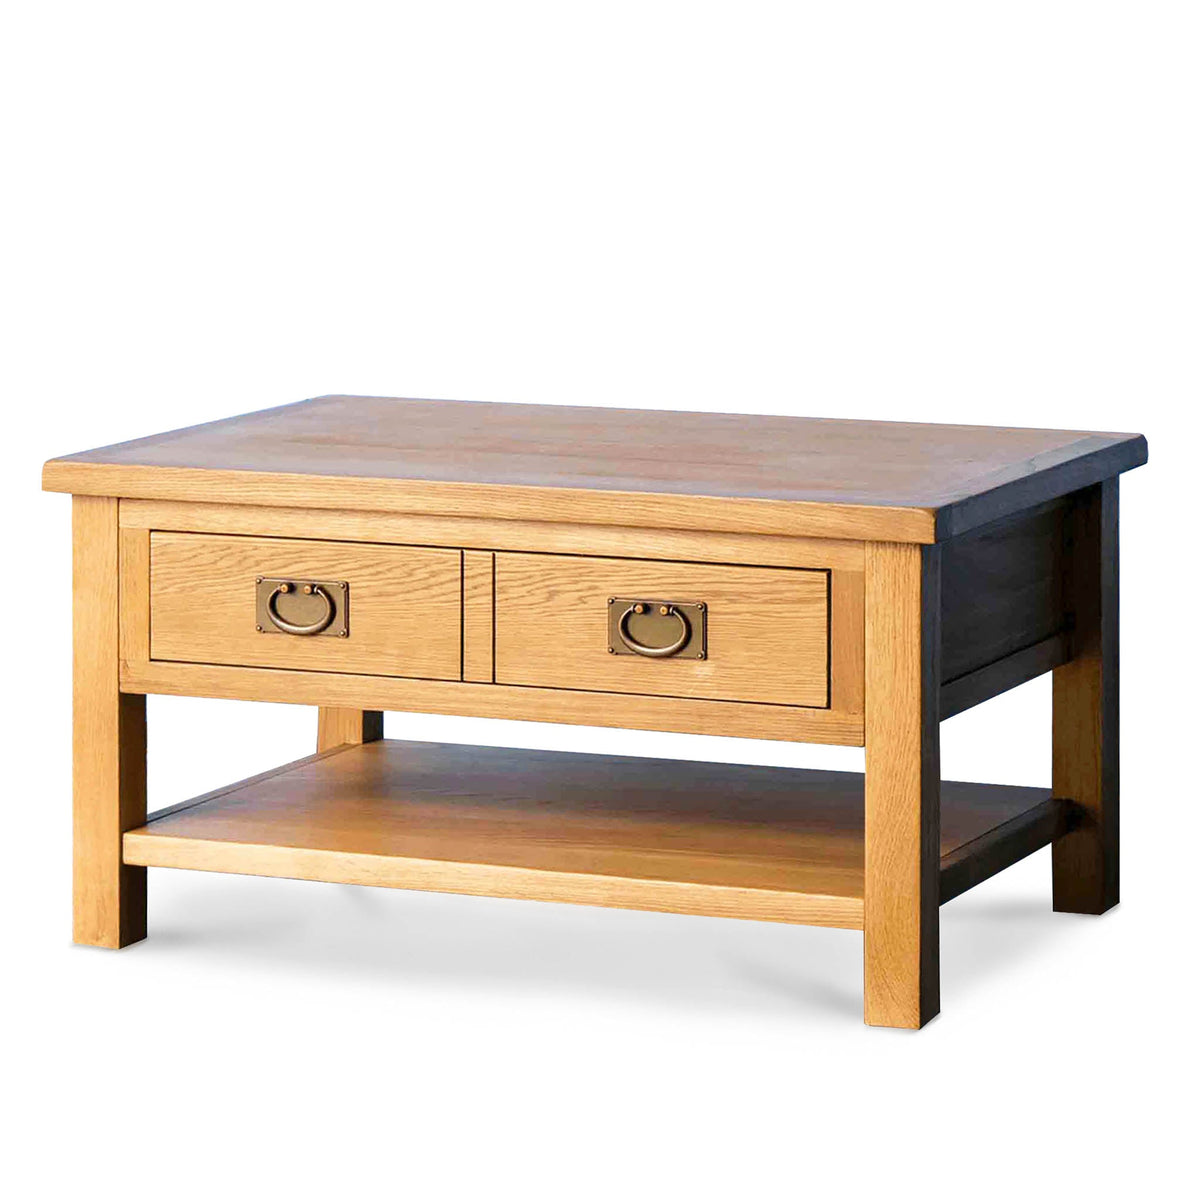 Surrey Oak Coffee Table with storage drawer